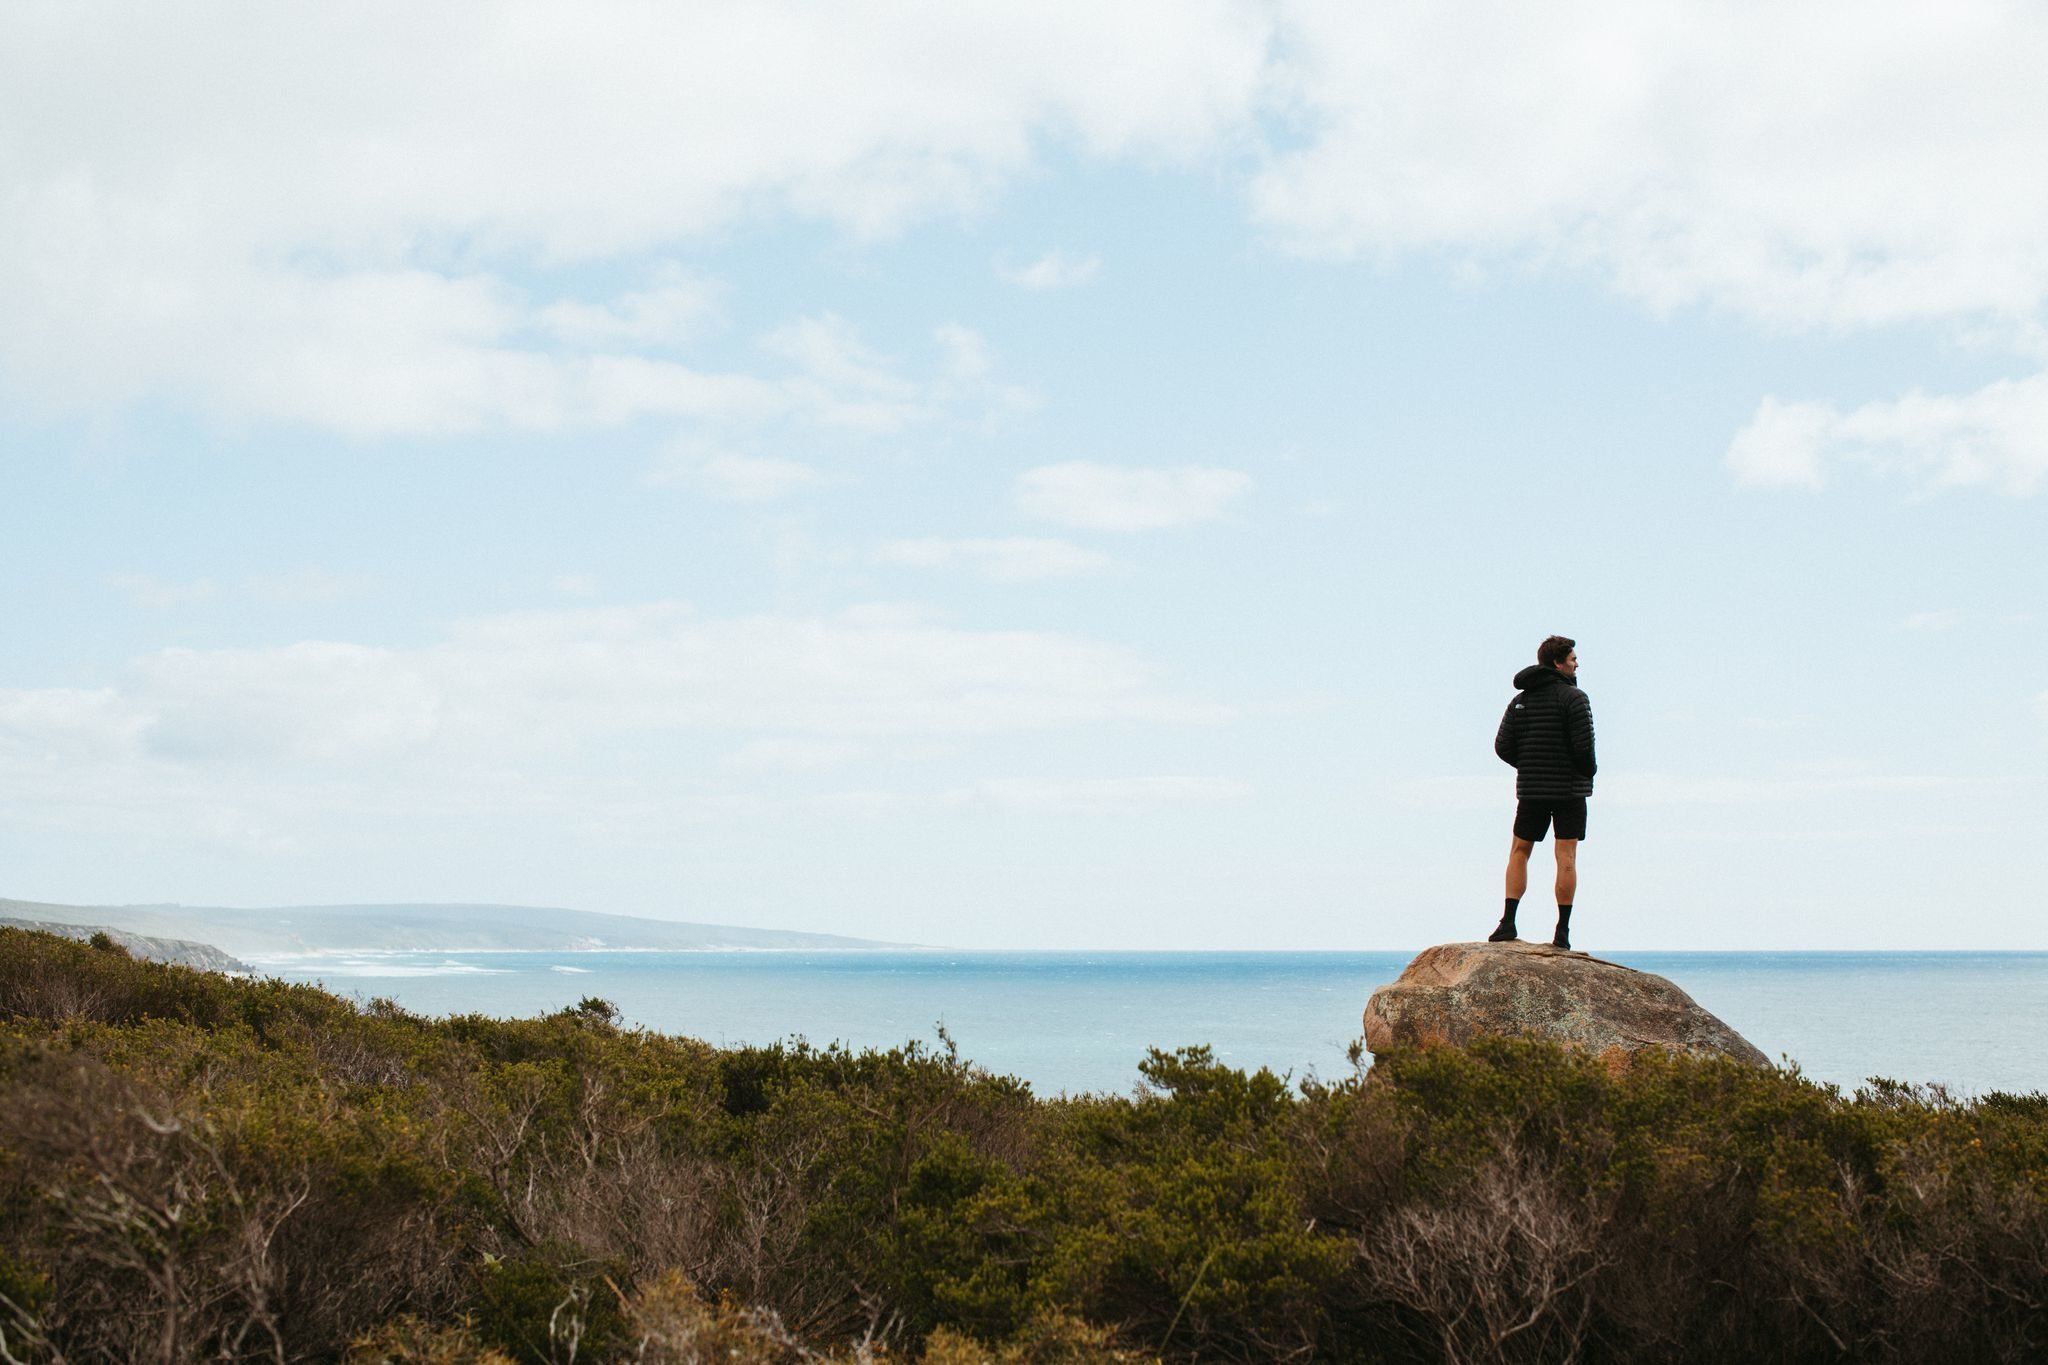 Ryan standing on a rock looking out at the ocean. Margaret River Brand Shoot. Credit Ryan Murphy